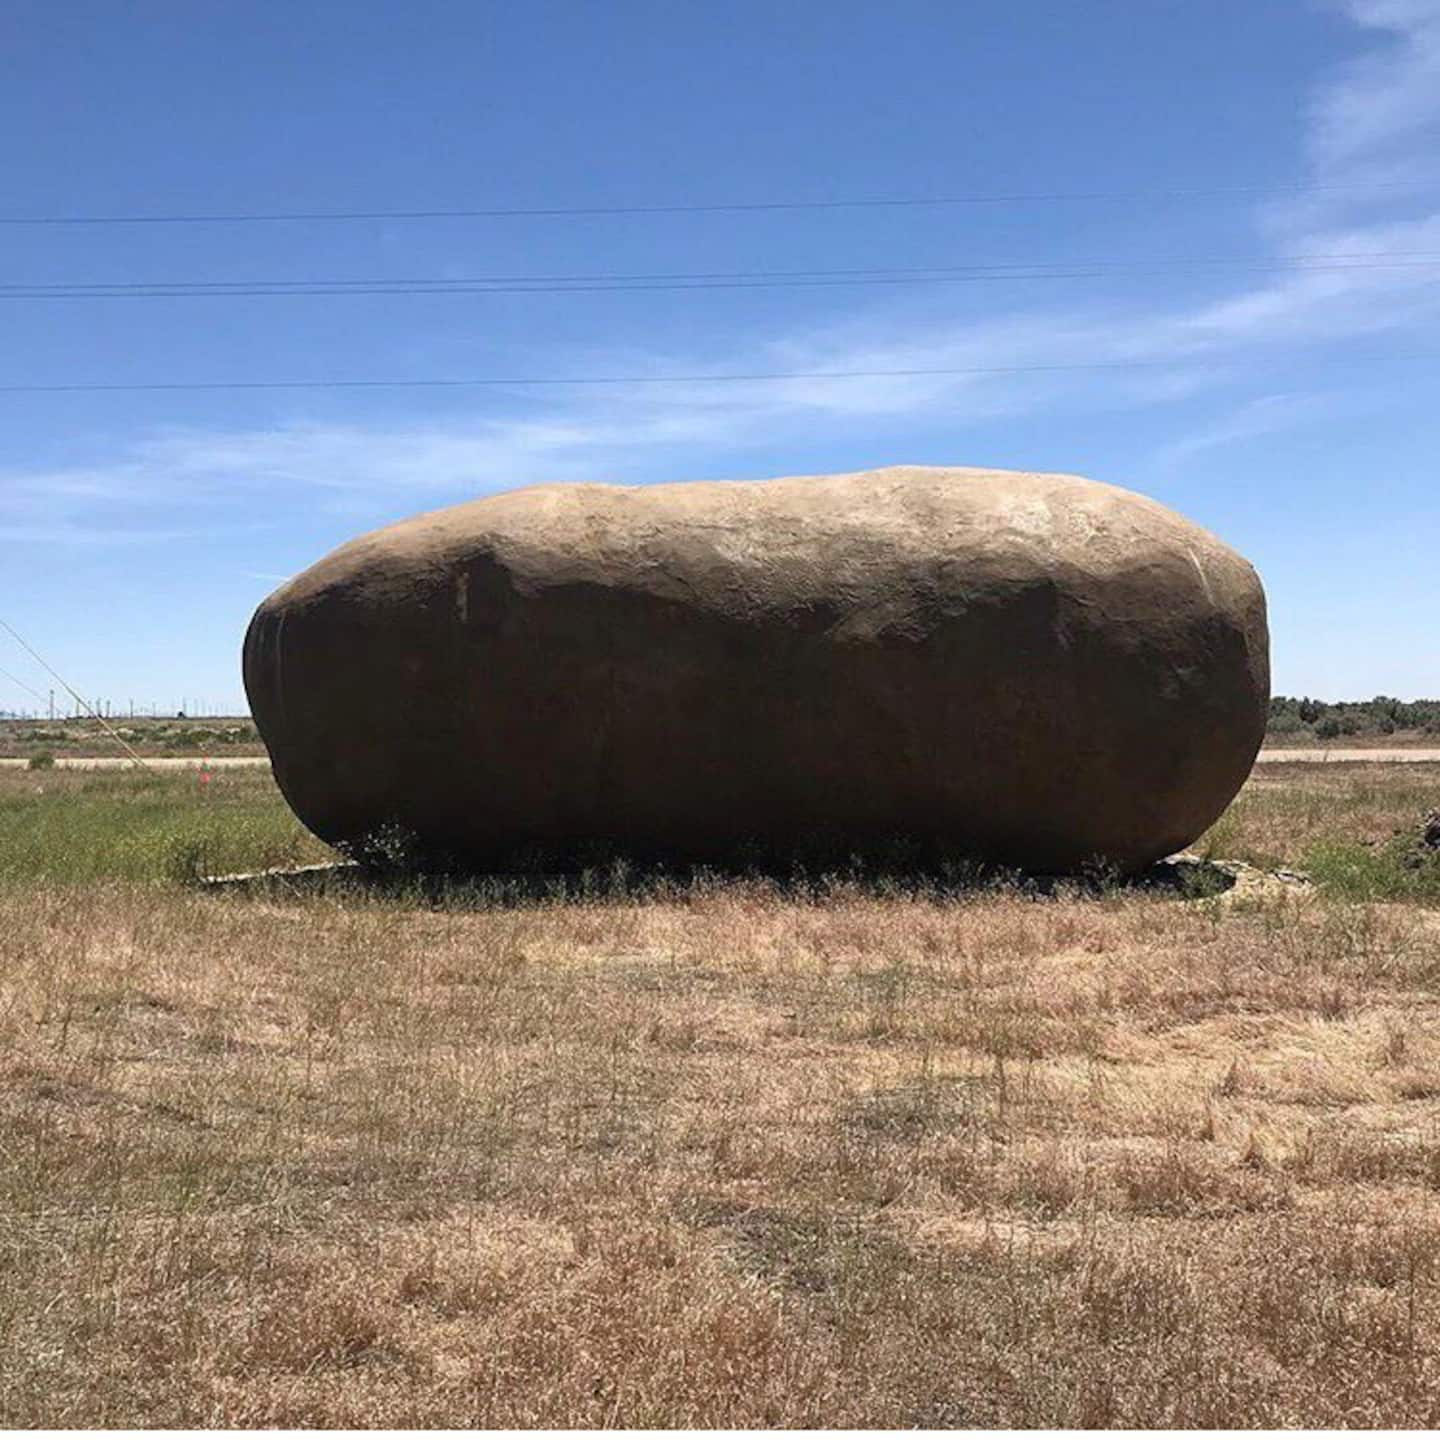 Big Idaho Potato, one of the best Airbnbs in the United States